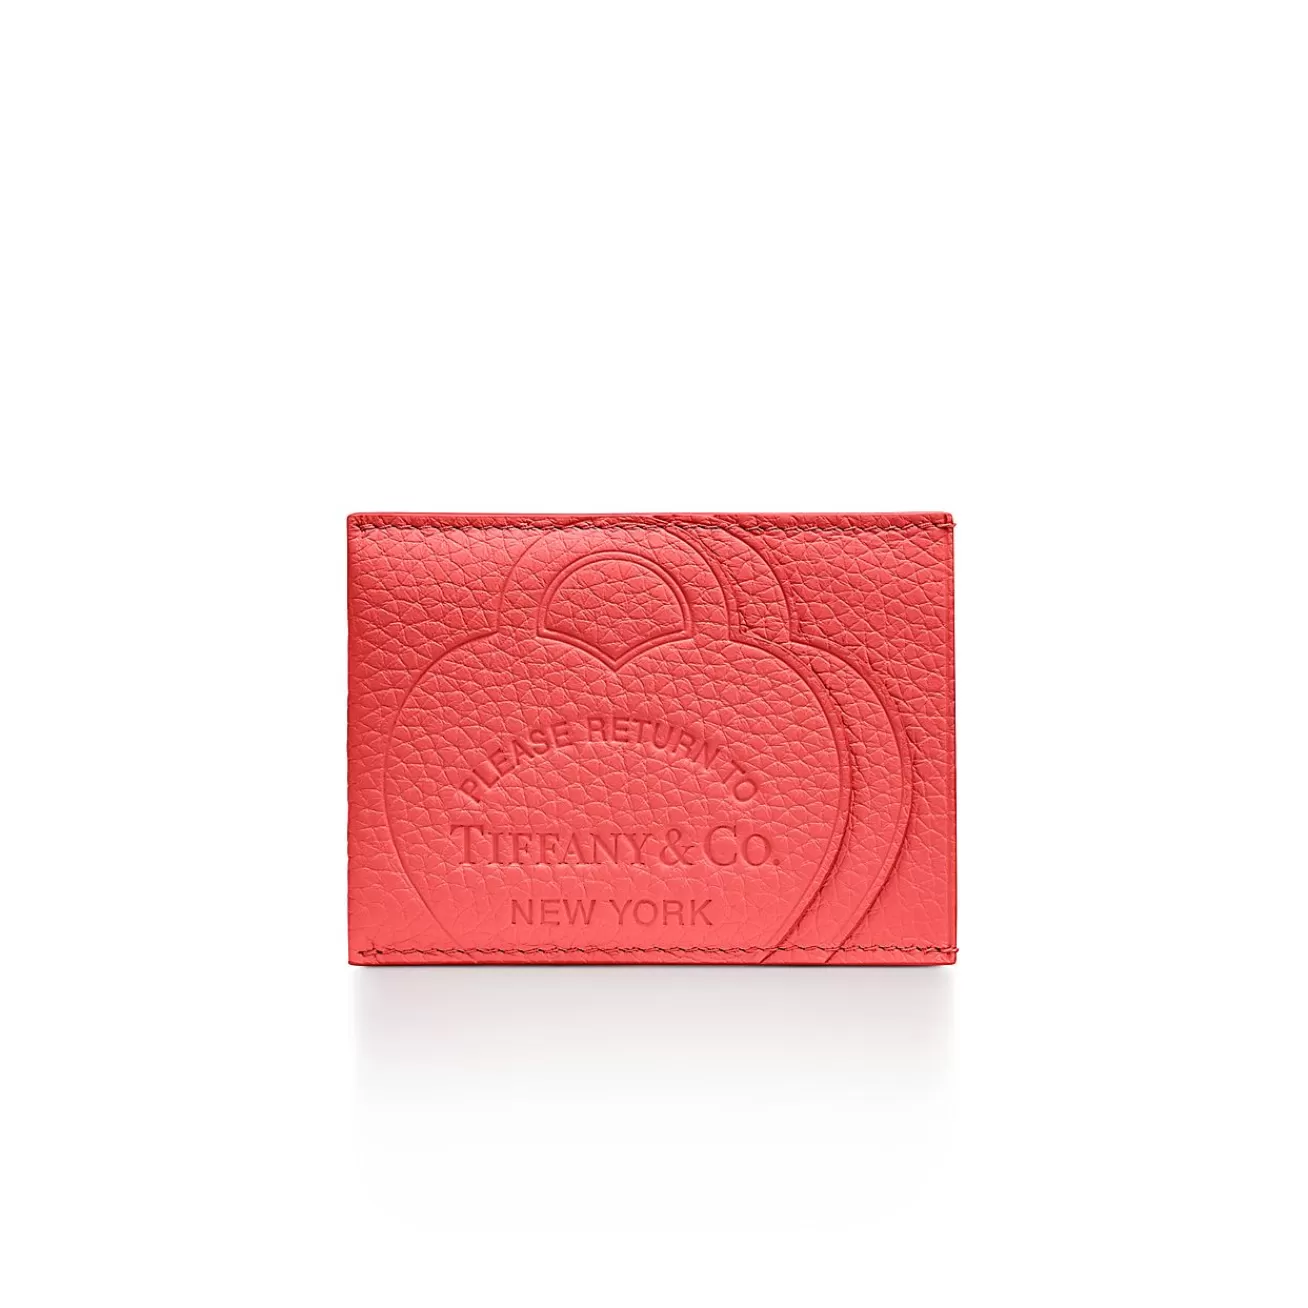 Tiffany & Co. Return to Tiffany® Card Case in Hibiscus Red Leather | ^Women Business Gifts | Small Leather Goods